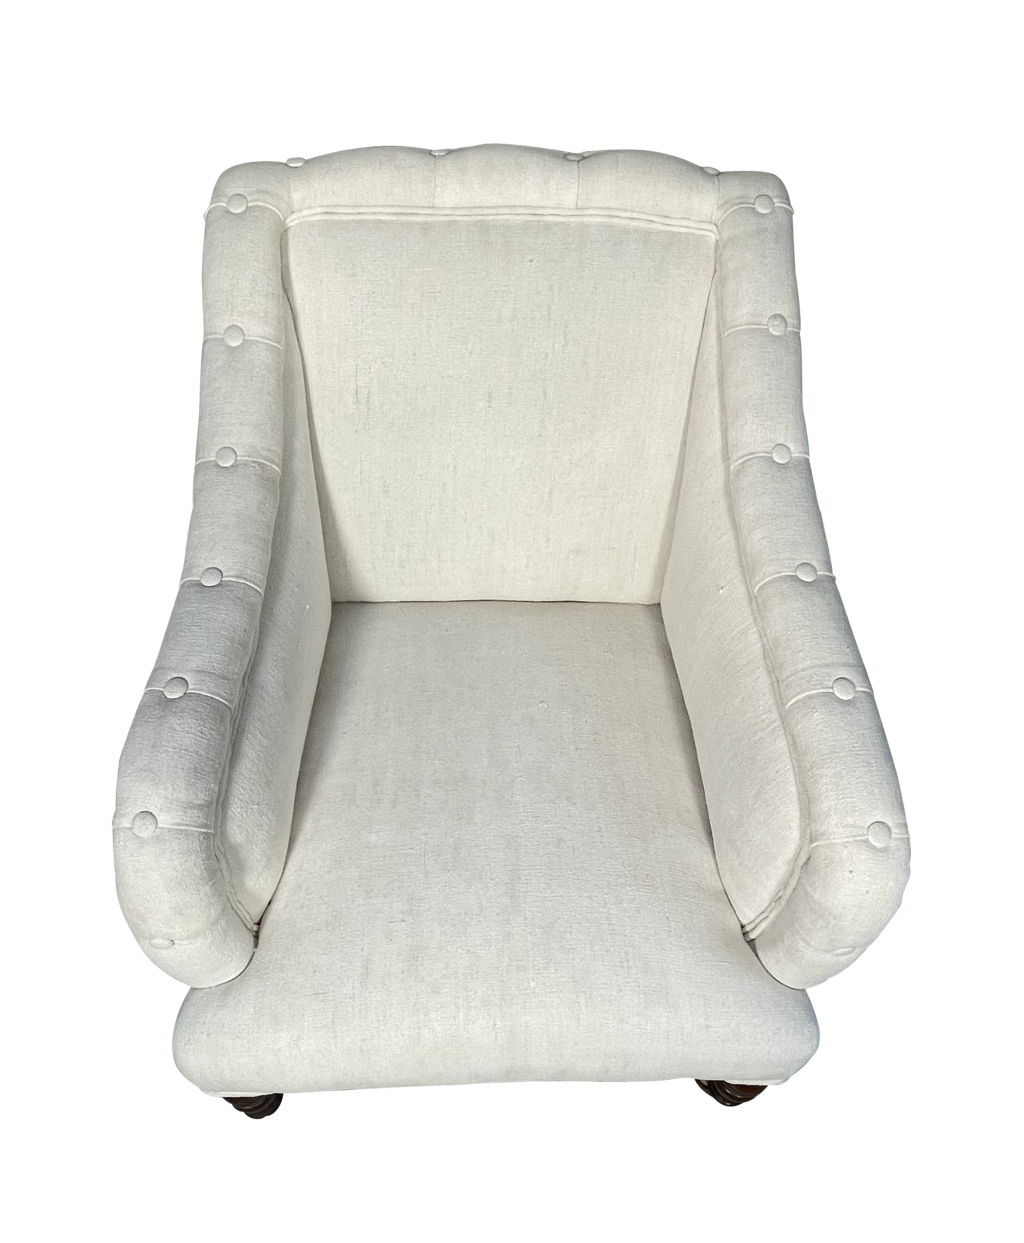 Victorian Armchair with Buttoned Scrolled Back and Sides Upholstered in Antique French Hemp Linen